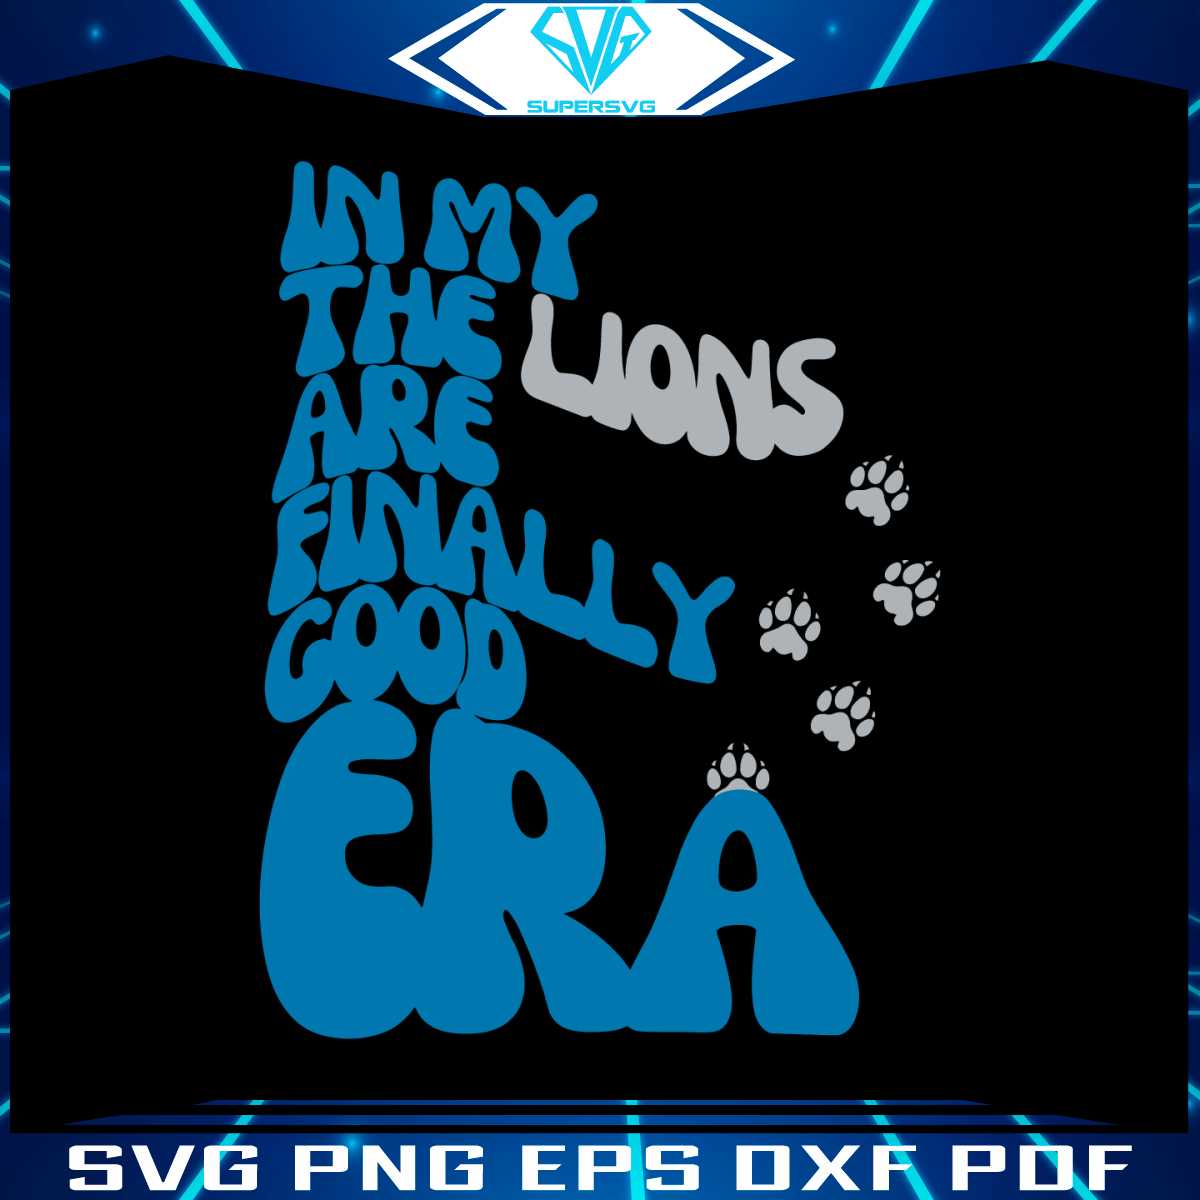 in-my-the-lions-are-finnaly-good-era-svg